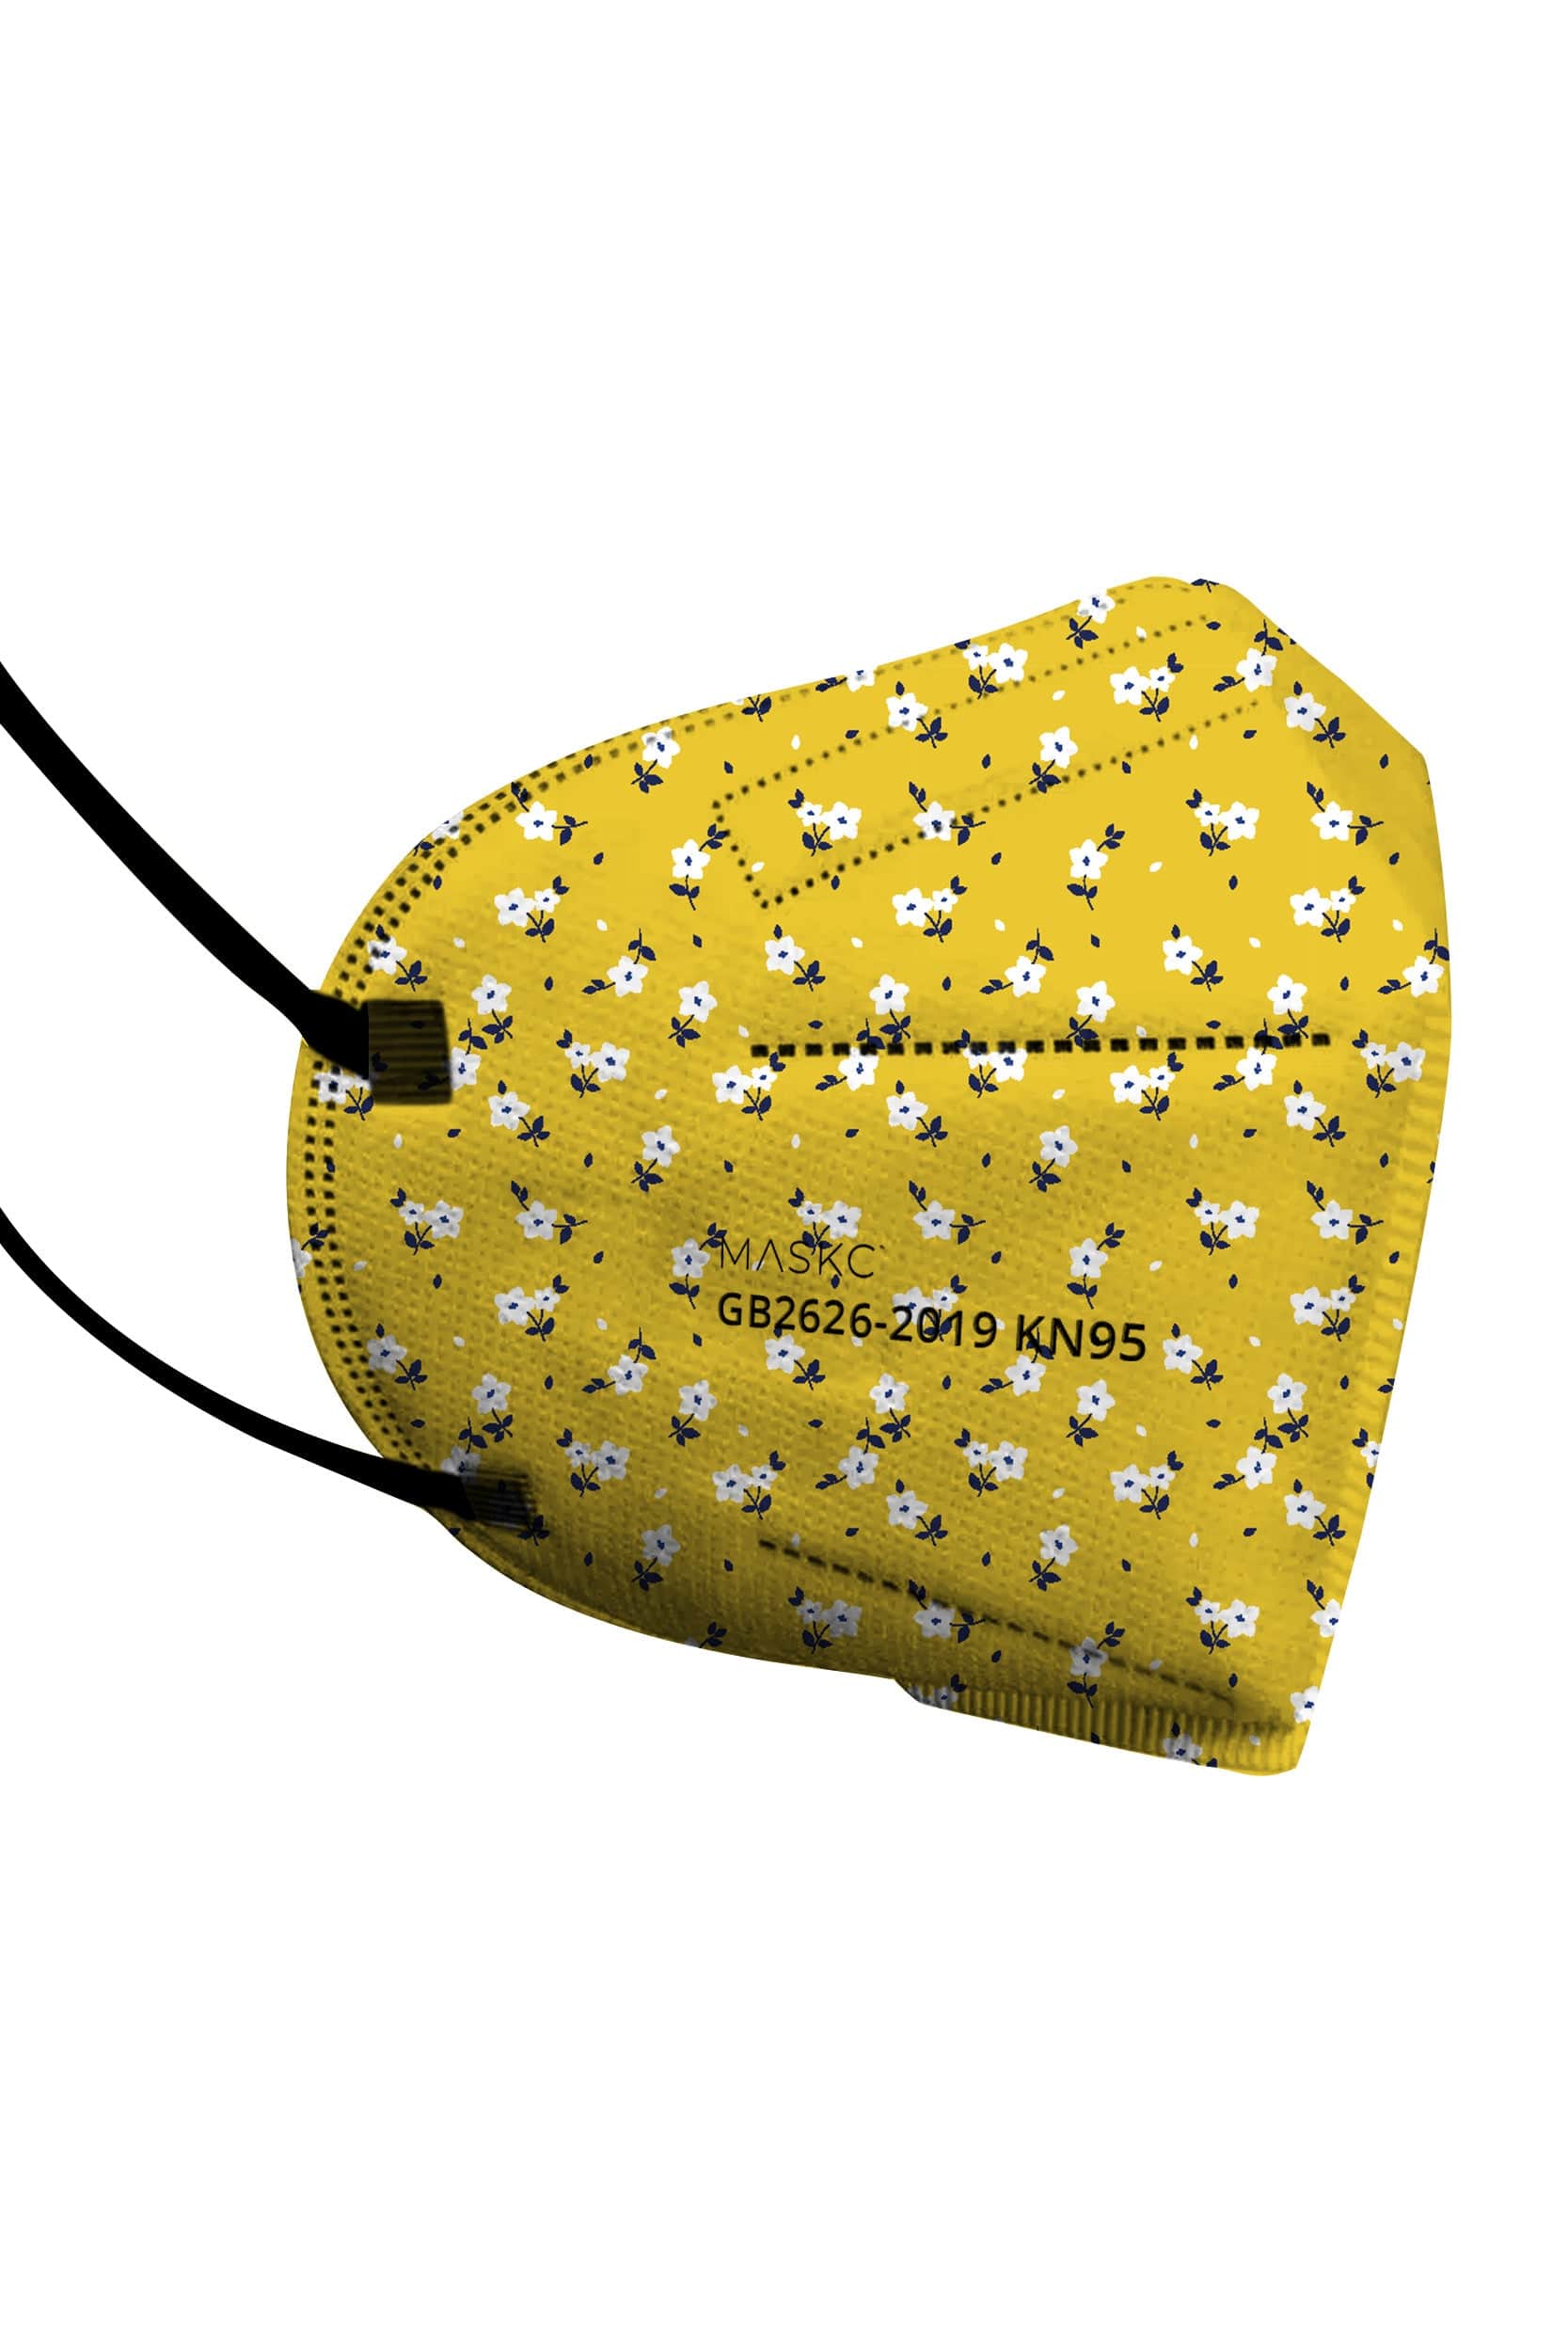 Stylish Yellow Floral KN95 face mask, with soft black ear loops and high quality fabric. 